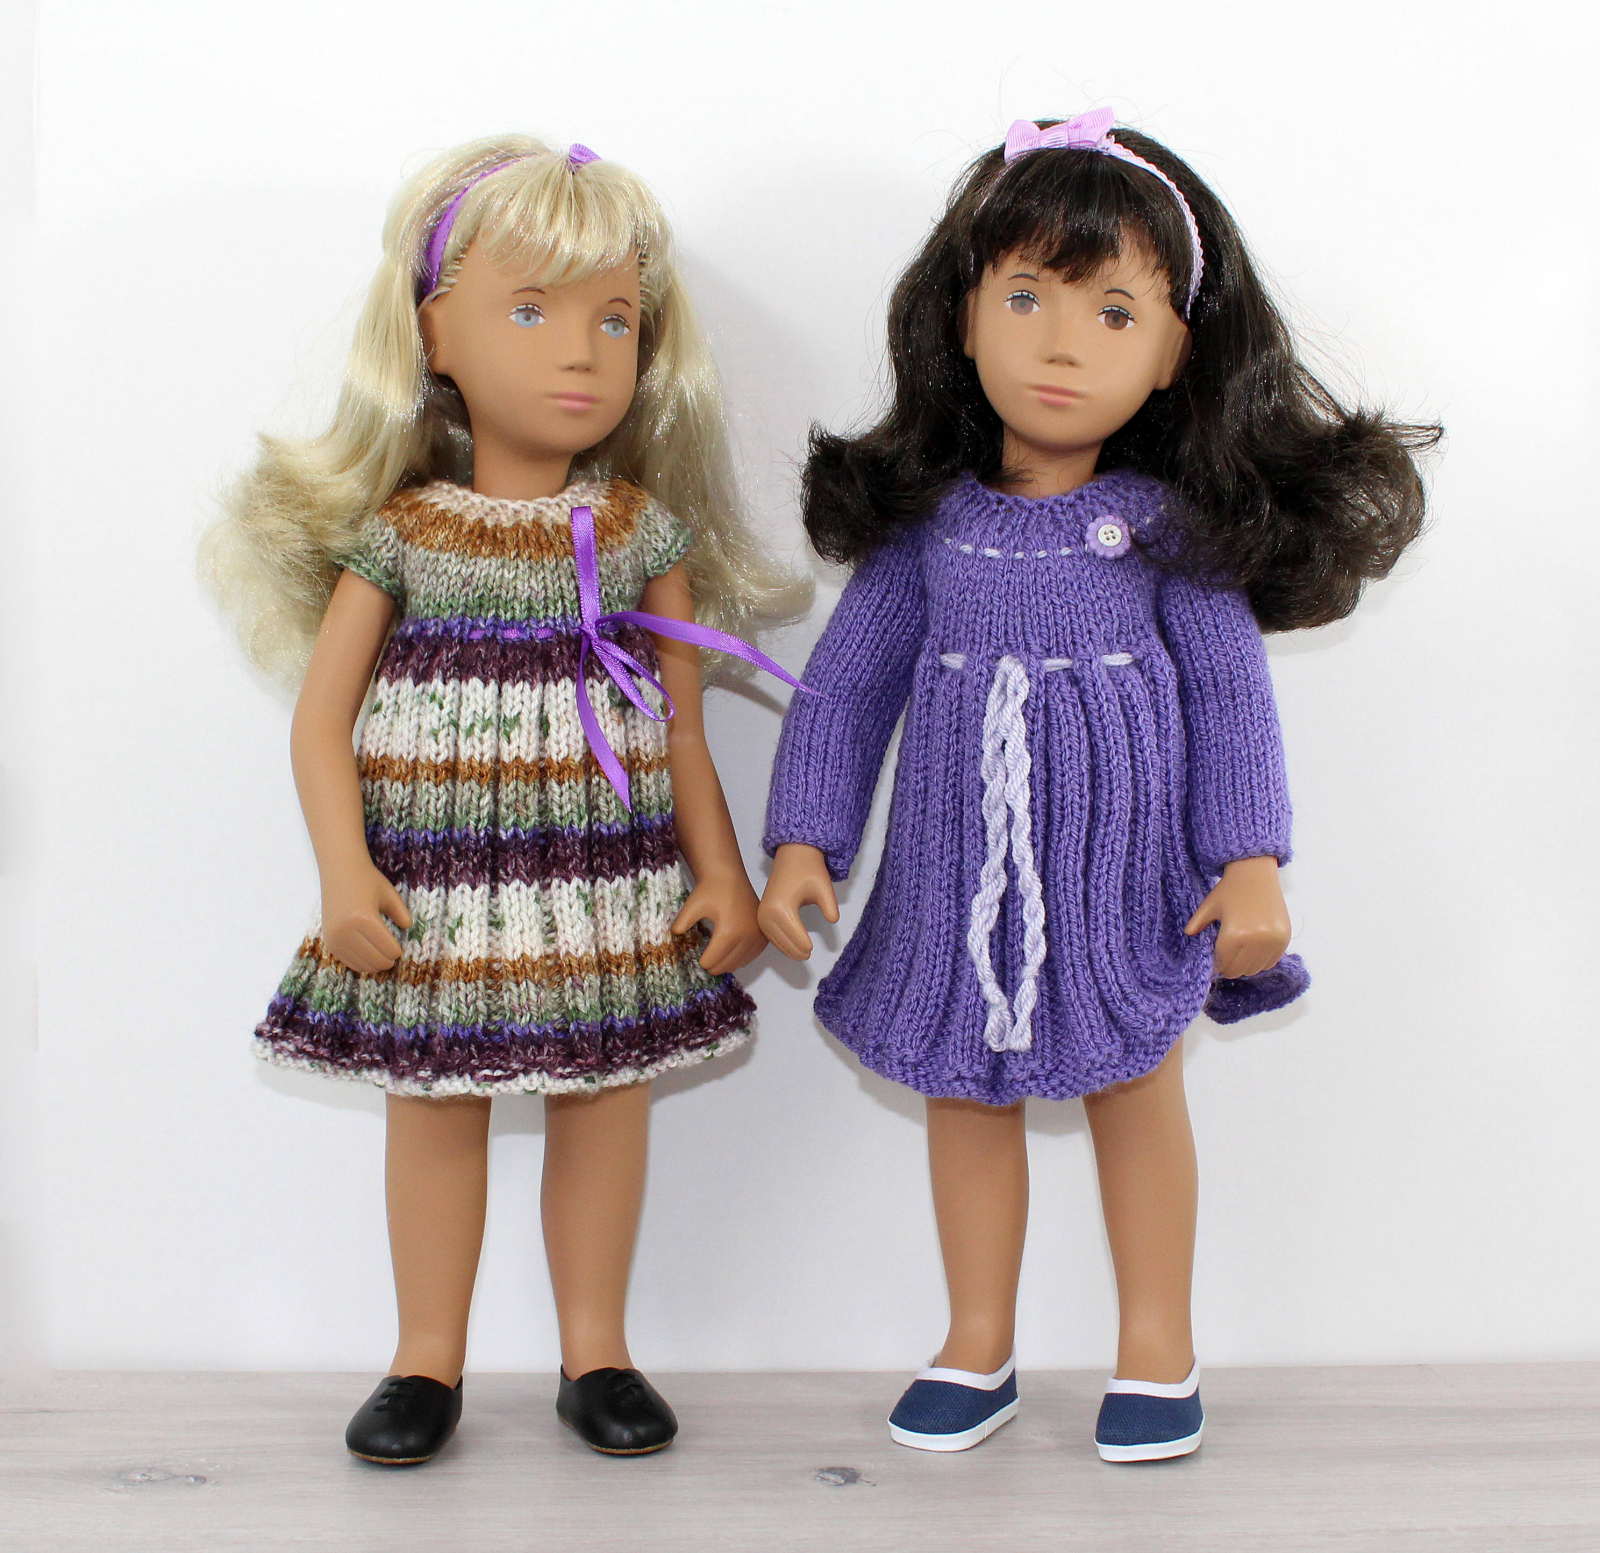 A KNITTING PATTERN FOR A PARTY DRESS FOR A 16 INCH SASHA DOLL 